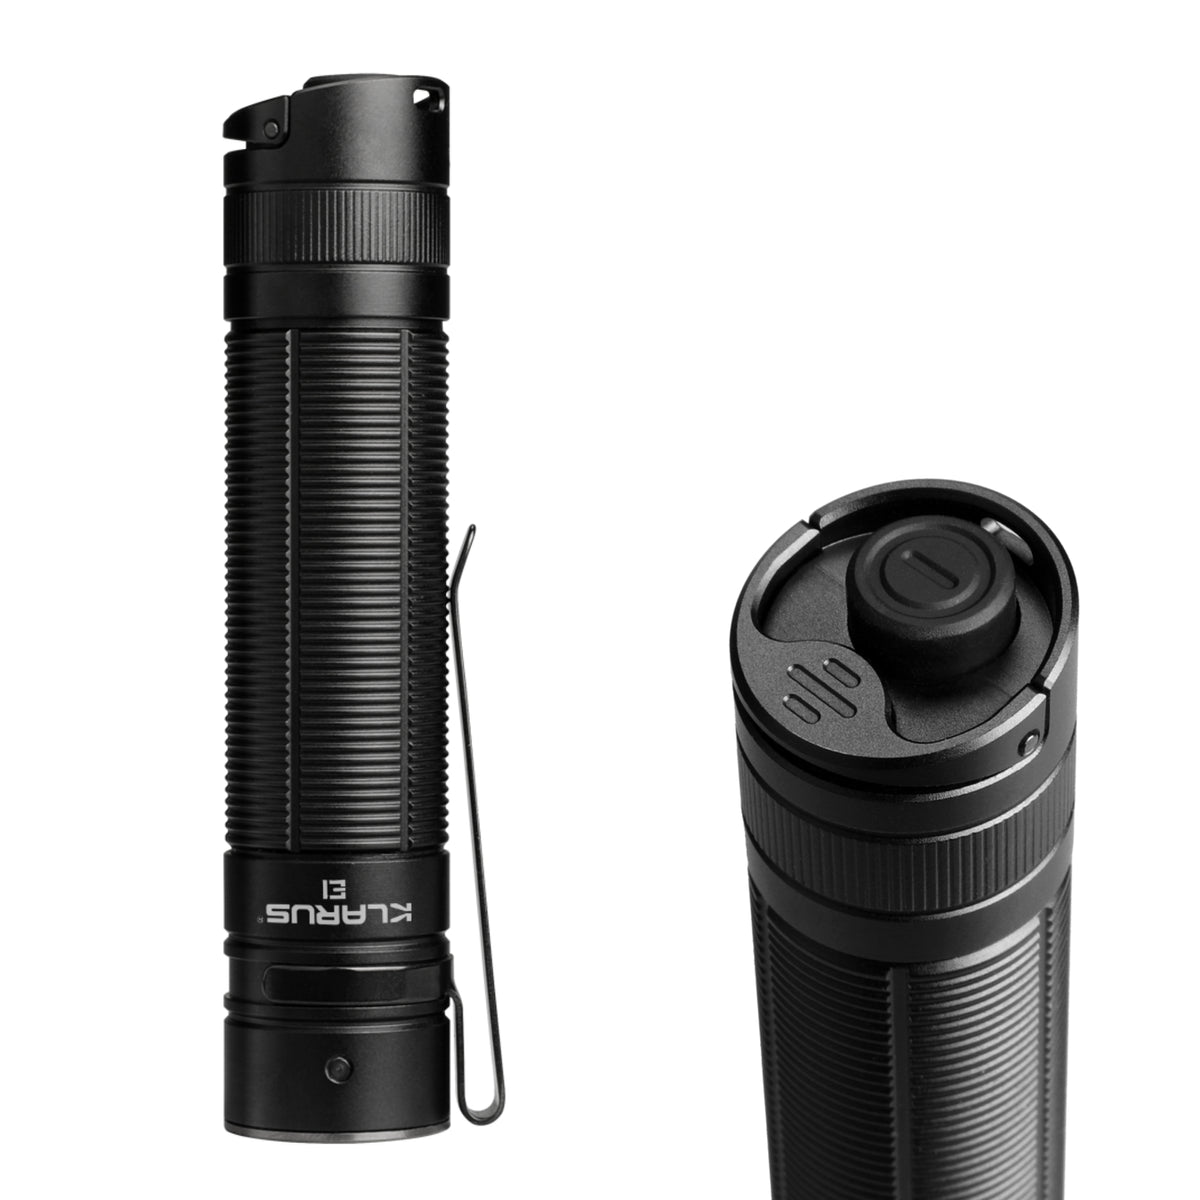 Latest designs, Klarus E1 Pocket Flashlight EDC Dual-Switch Tactical  Rechargeable Light Klarus Now you can shop with speedy delivery